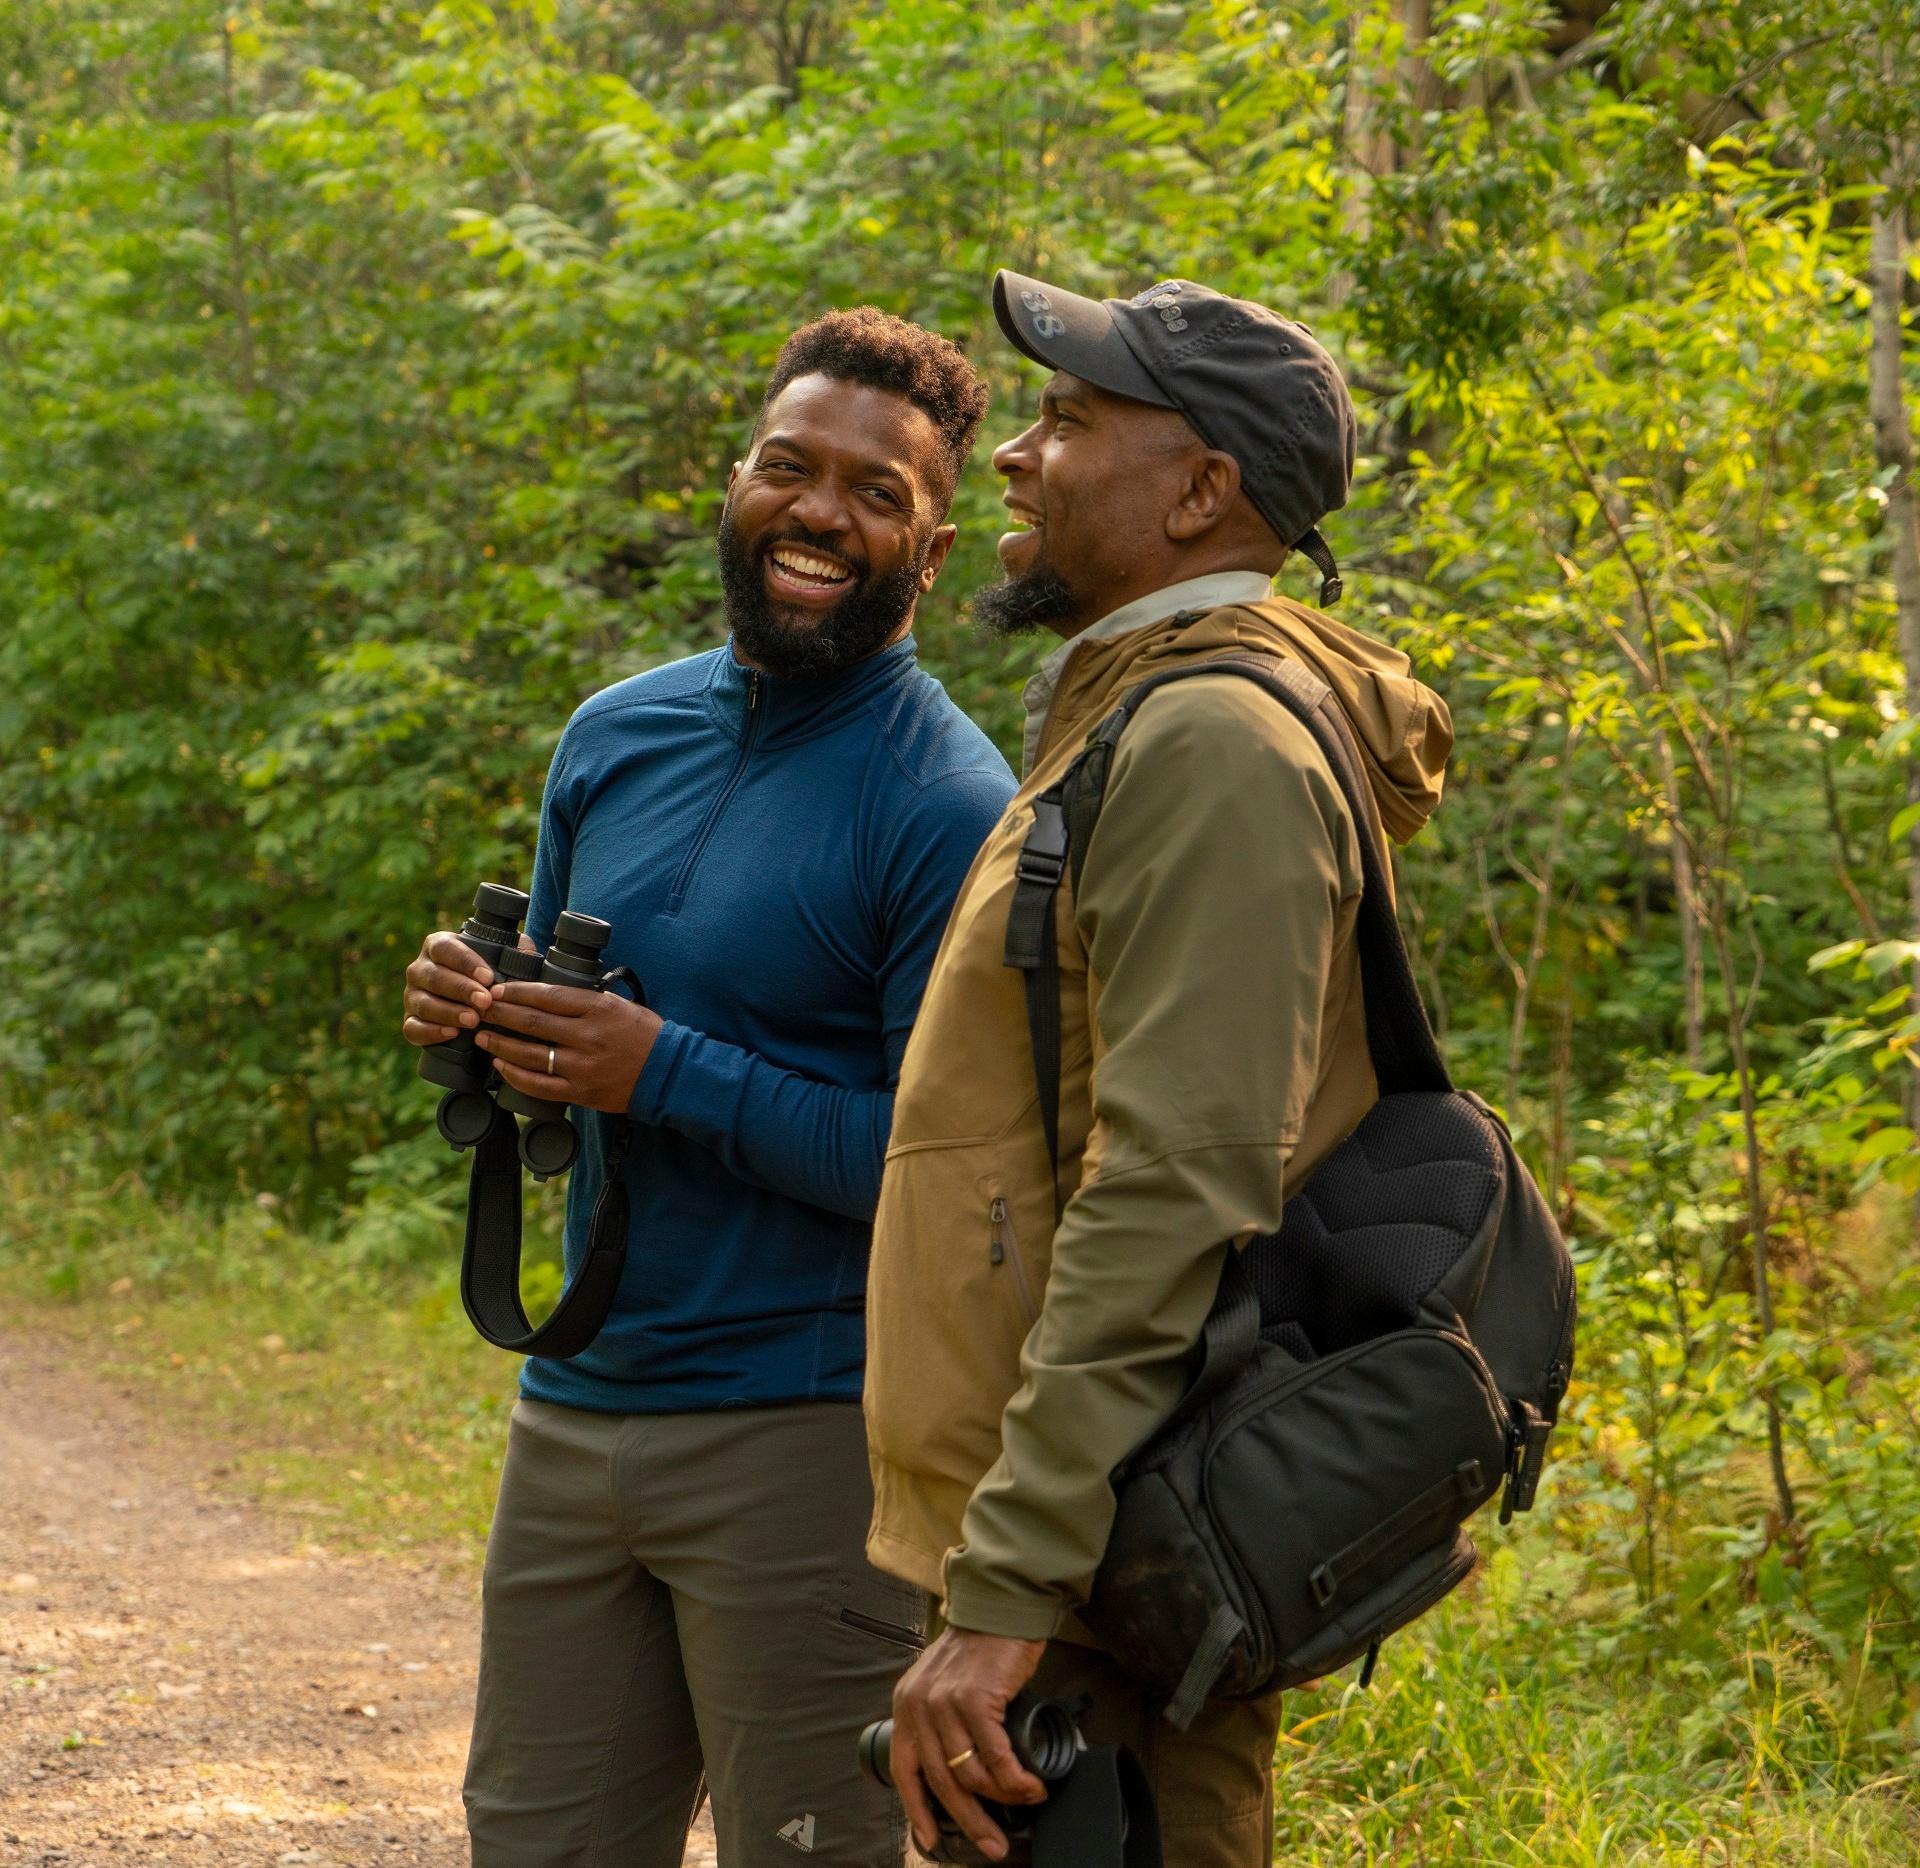 Dudley Edmonson and Baratunde Thurston in Hawks Ridge Nature Reserve in Duluth, MN